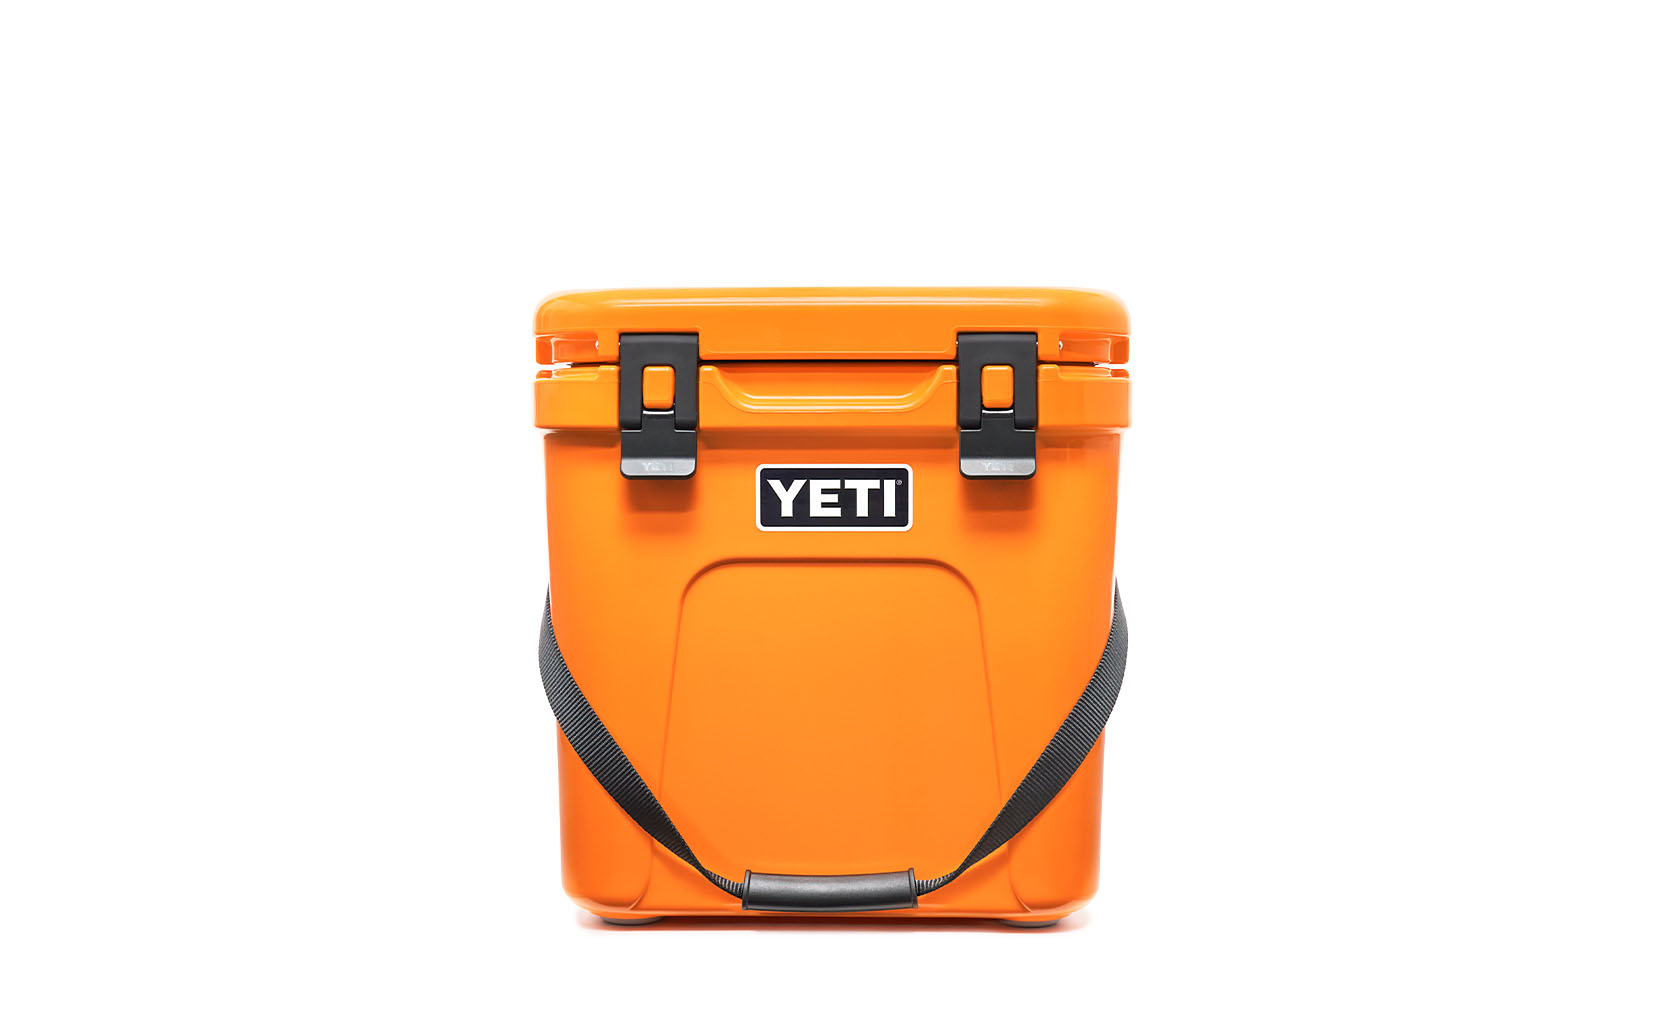 YETI - Our new King Crab Orange Collection brings a bold pinch of